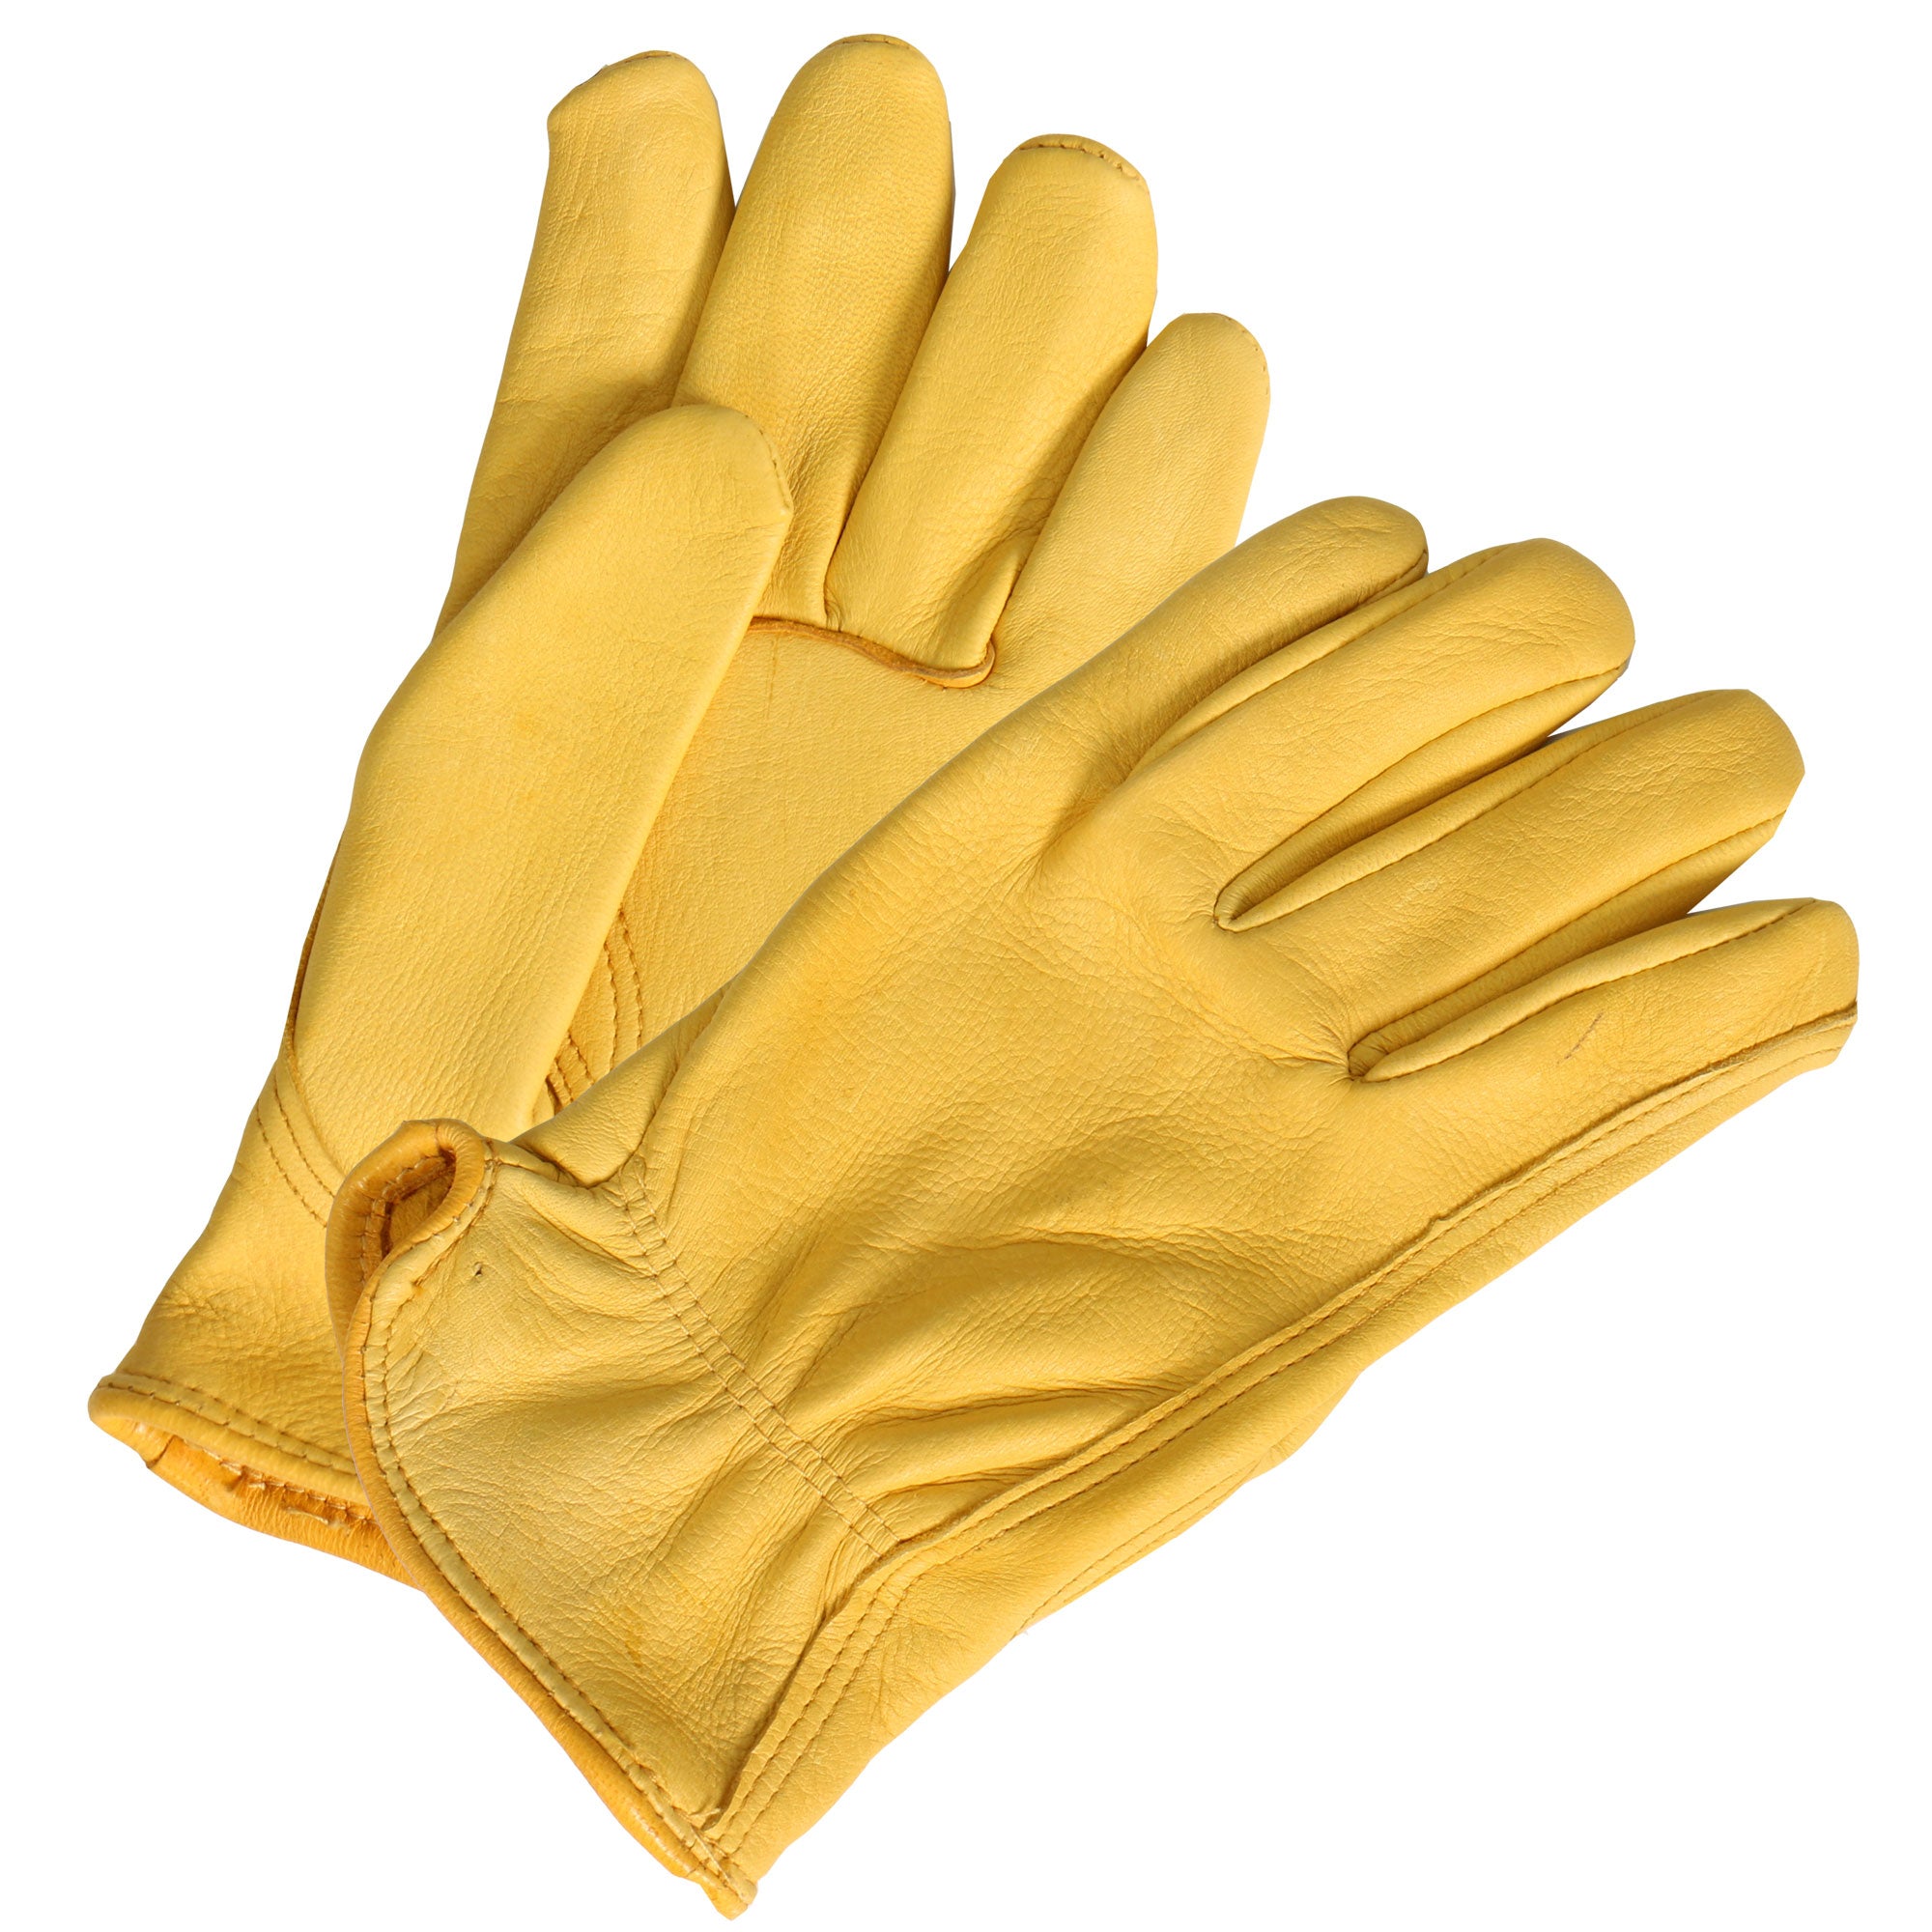 Hot Leathers GVD1012 Gold Deerskin Leather Driving Gloves